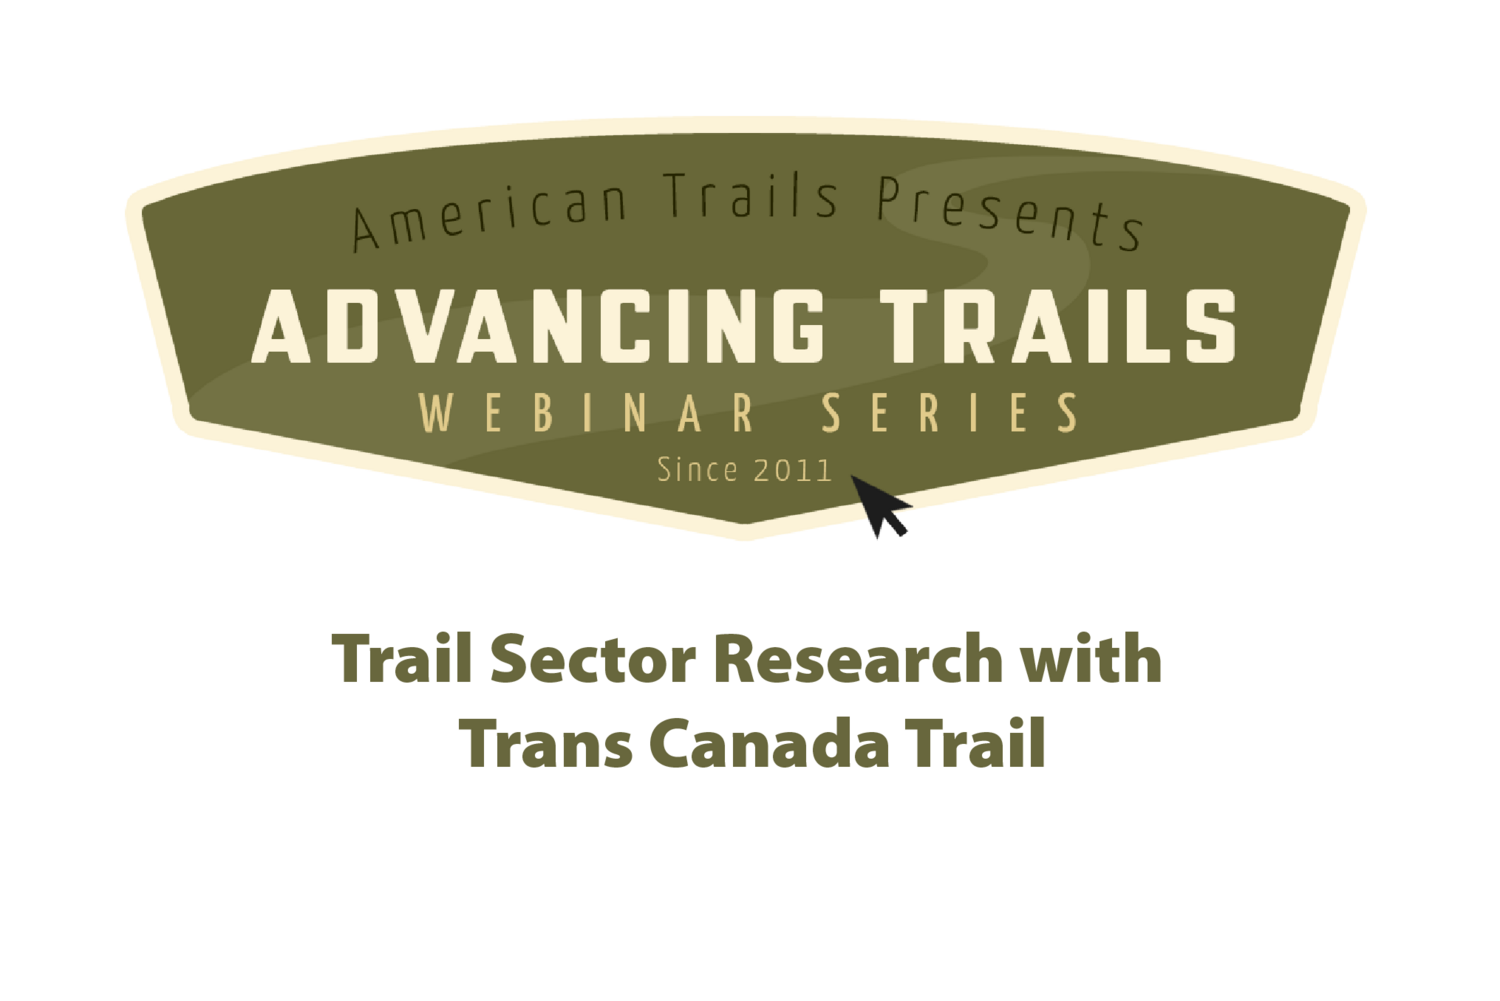 Trail Sector Research with Trans Canada Trail (RECORDING)